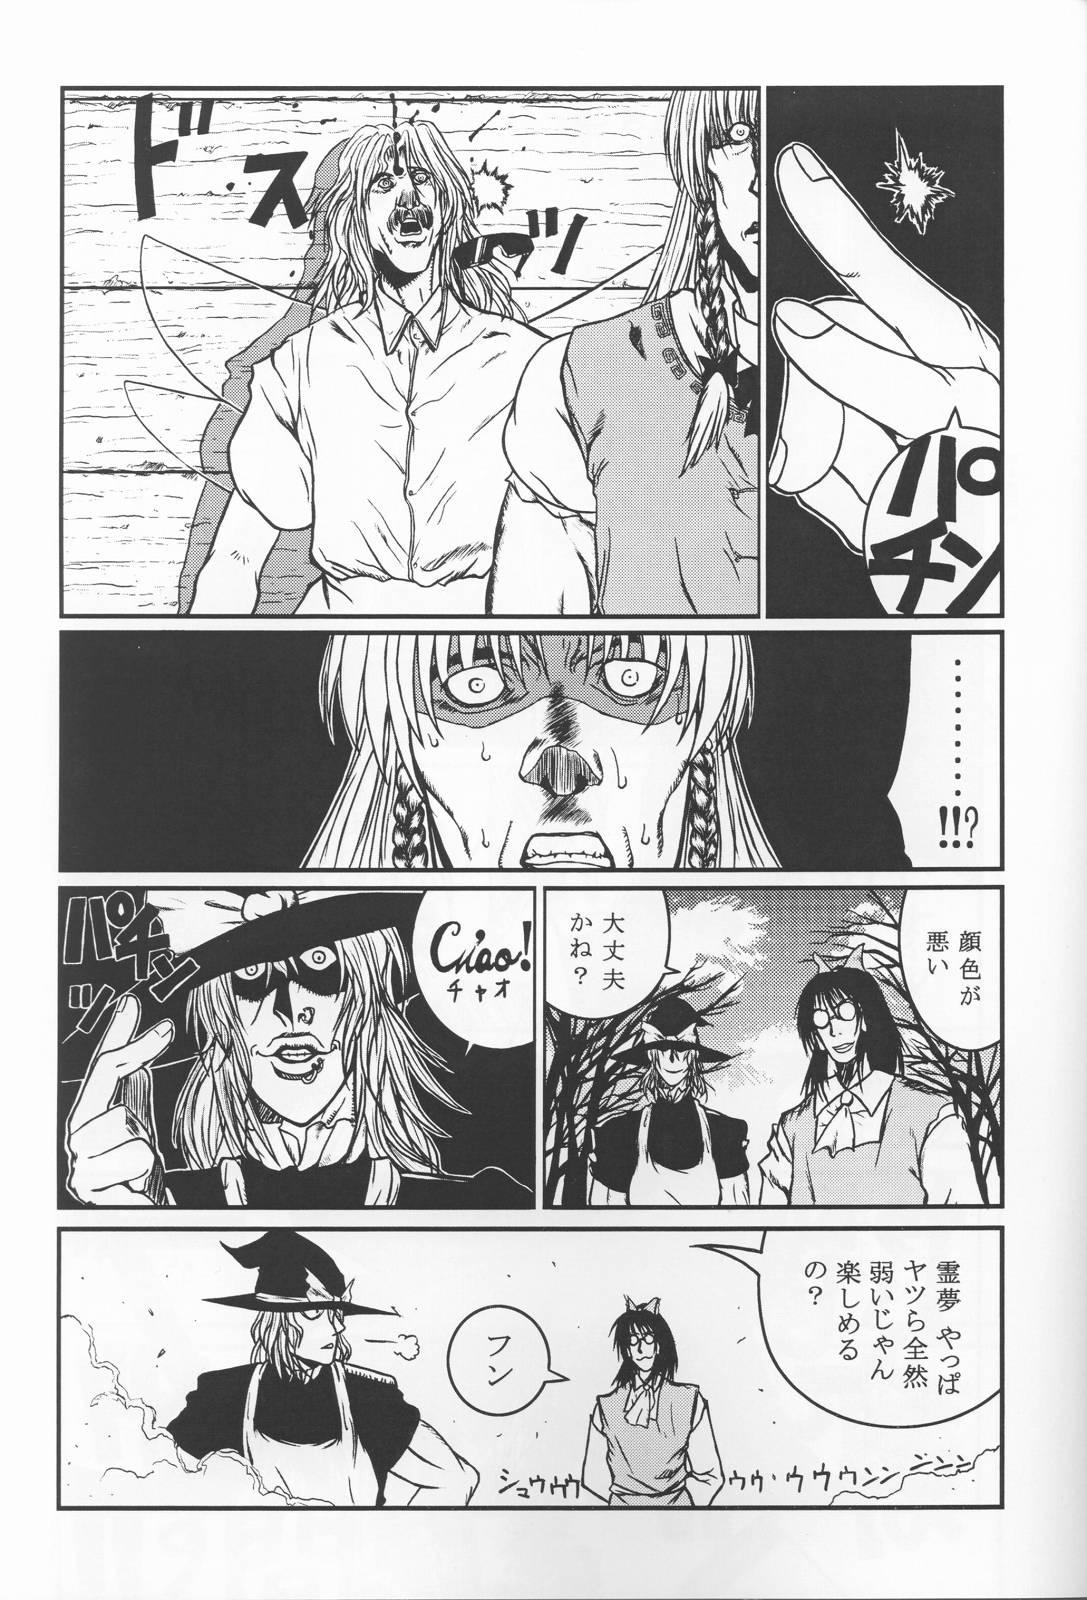 Rope HELLSING？ - Touhou project Exposed - Page 8